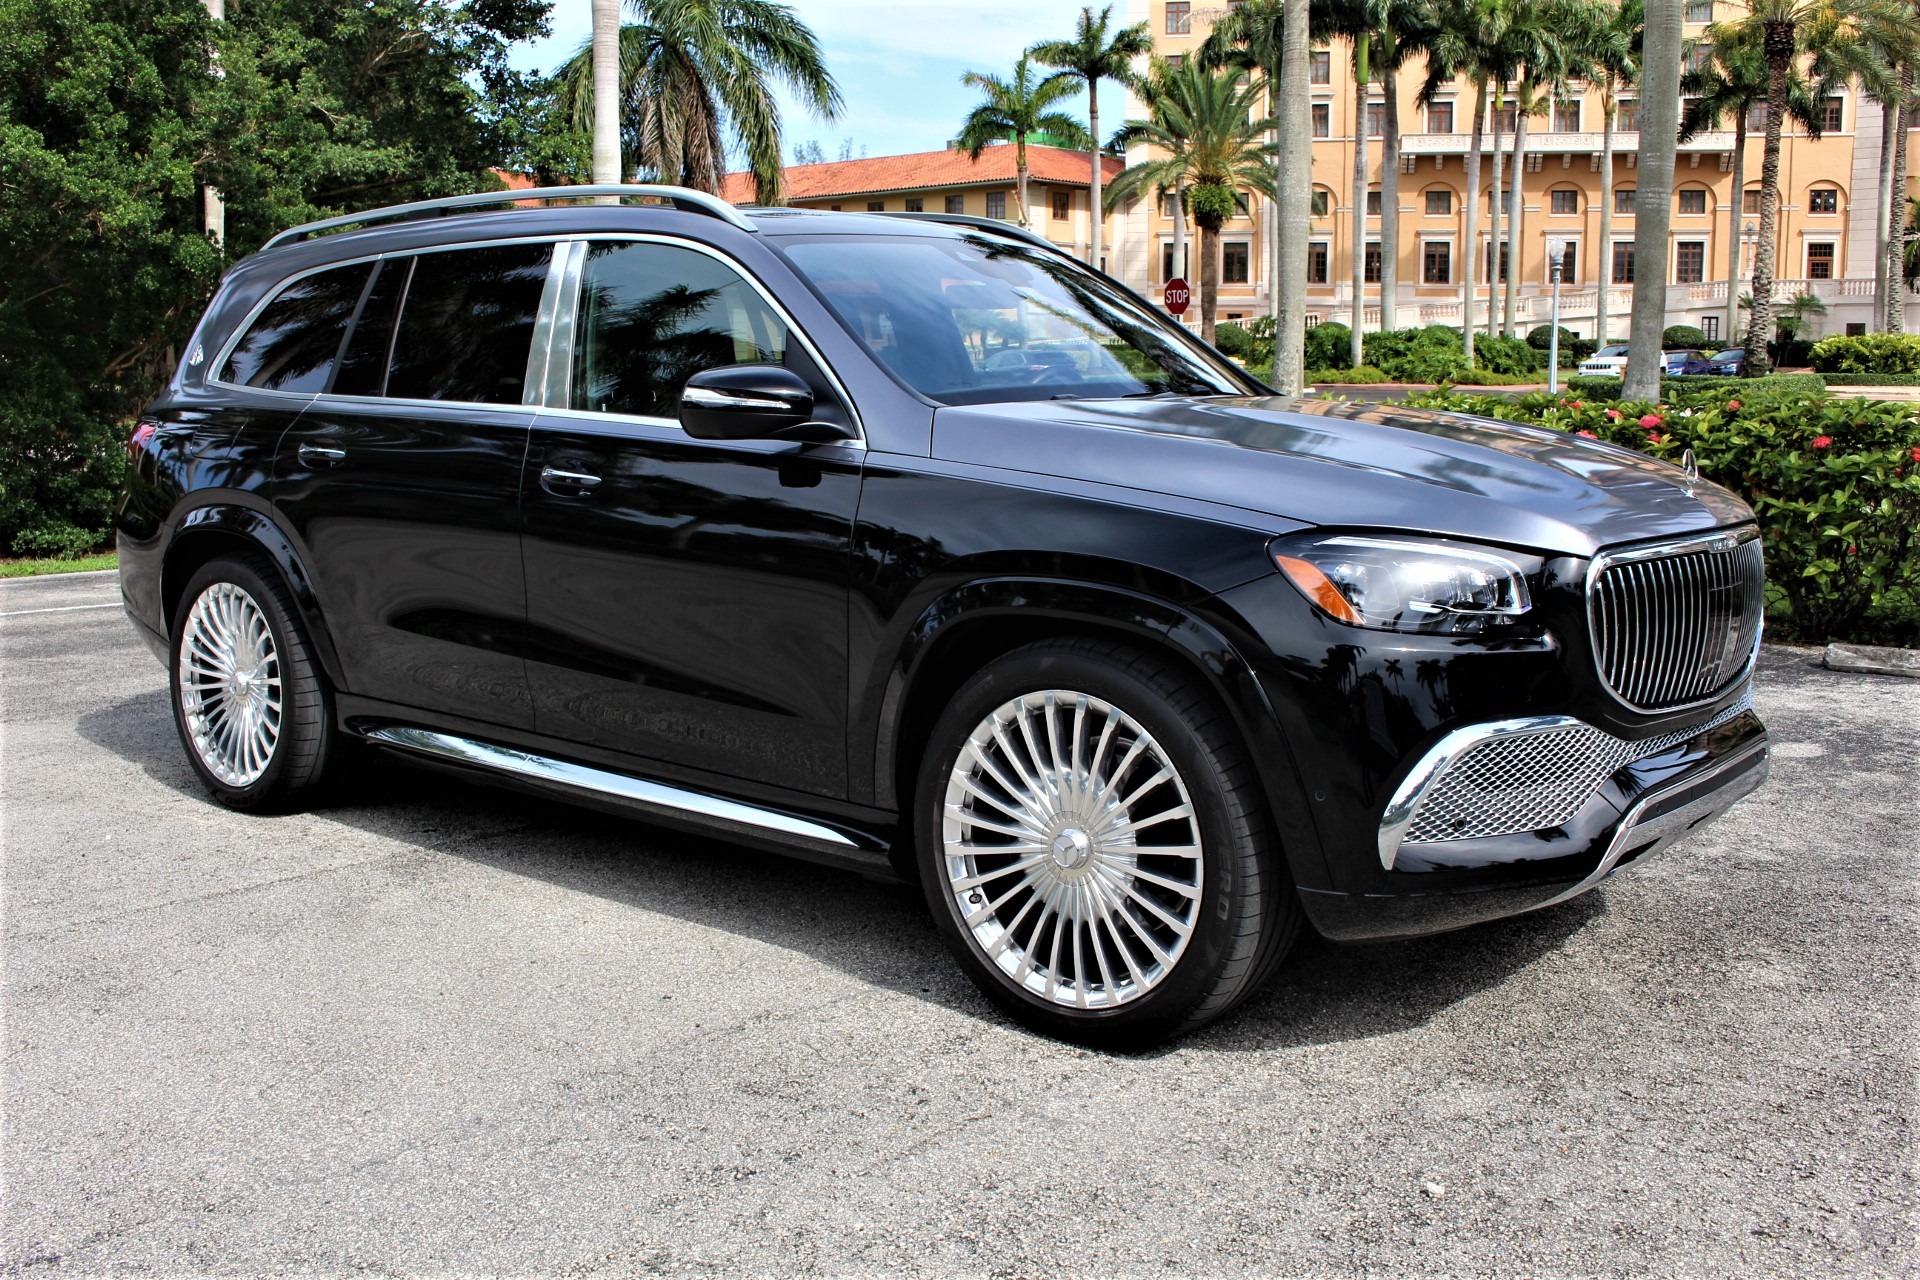 Used 2021 Mercedes-Benz GLS Mercedes-Maybach GLS 600 4MATIC for sale Sold at The Gables Sports Cars in Miami FL 33146 3